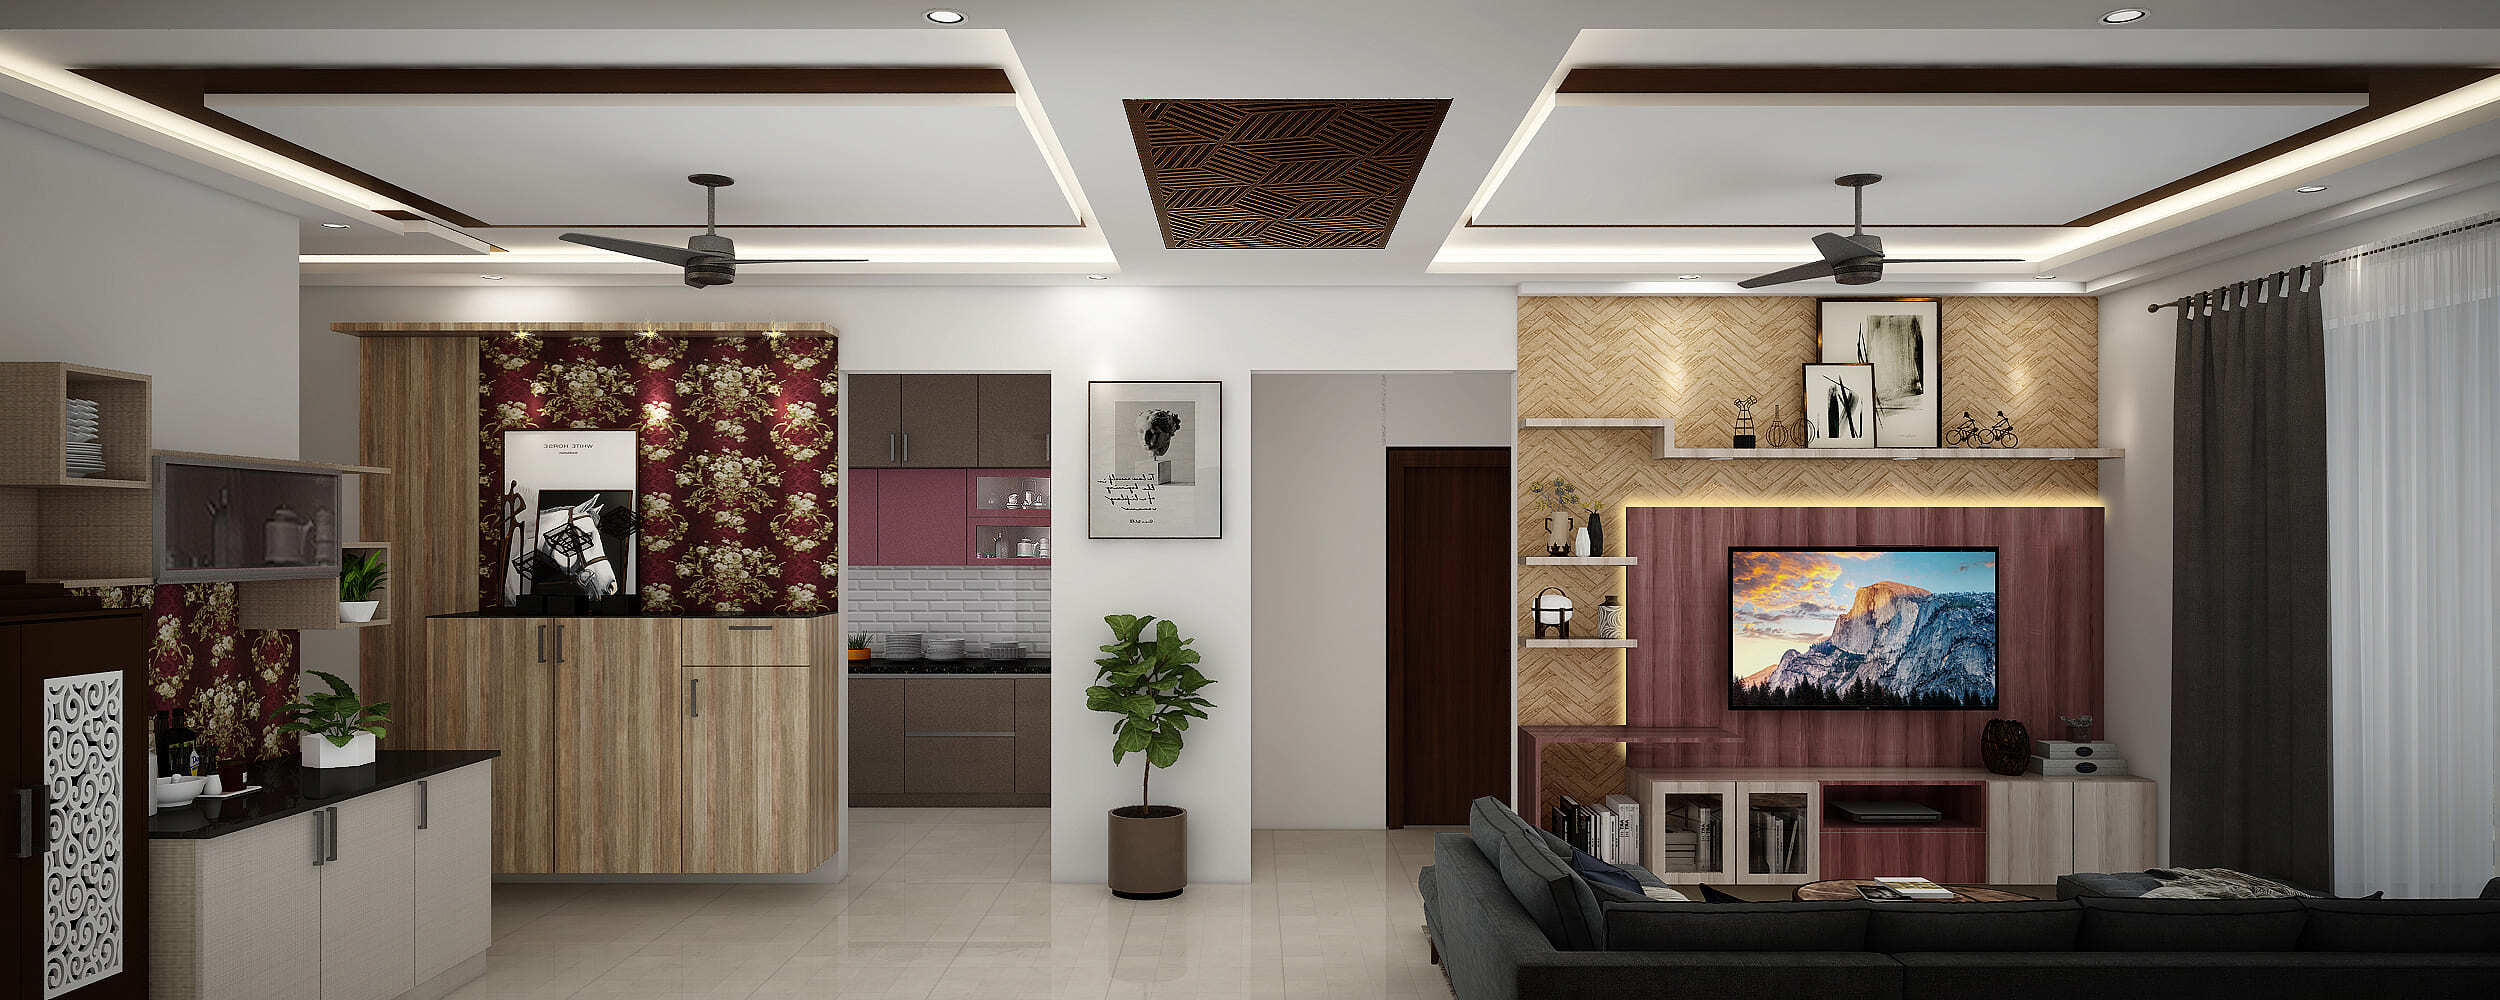 Best home interior designers in Bangalore - Most loved Interior Design Ideas for Living Room